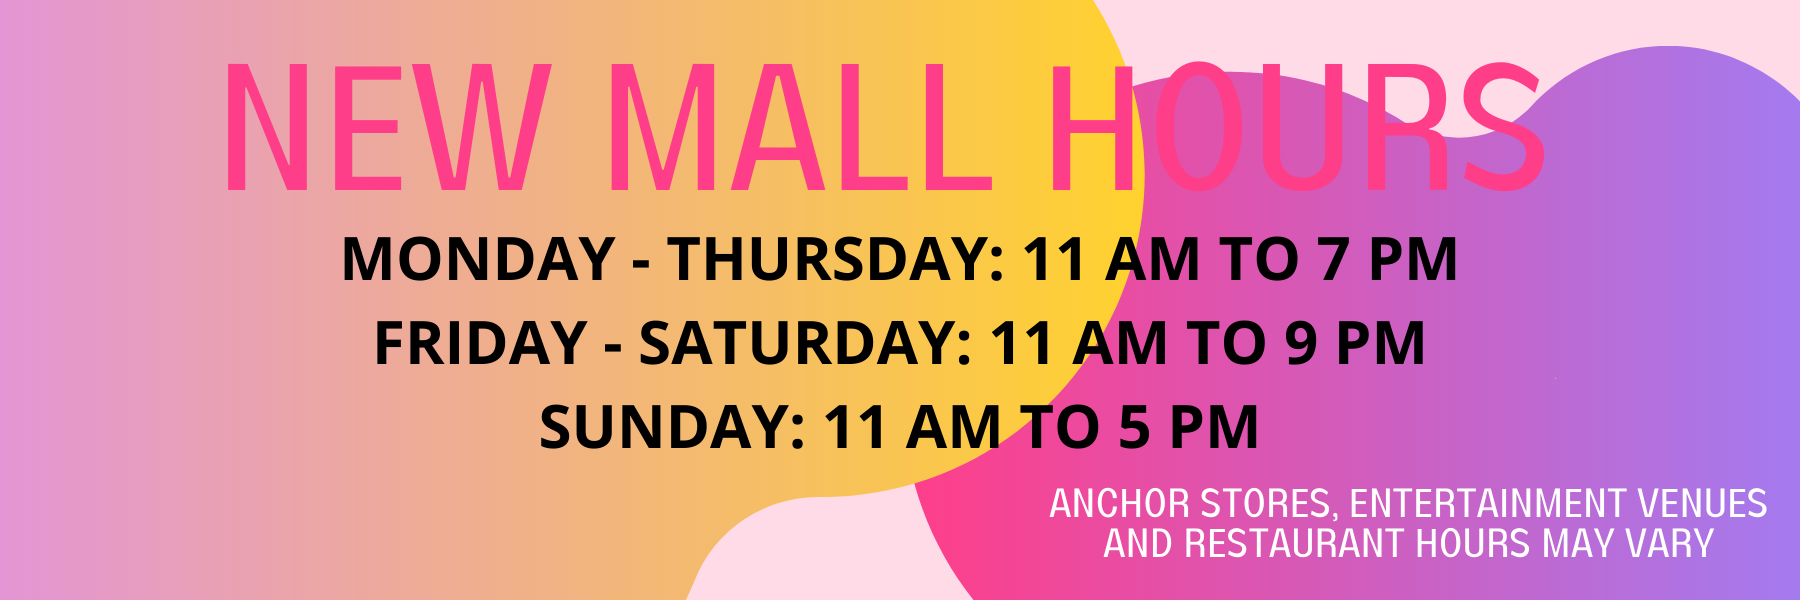 NEW MALL HOURS